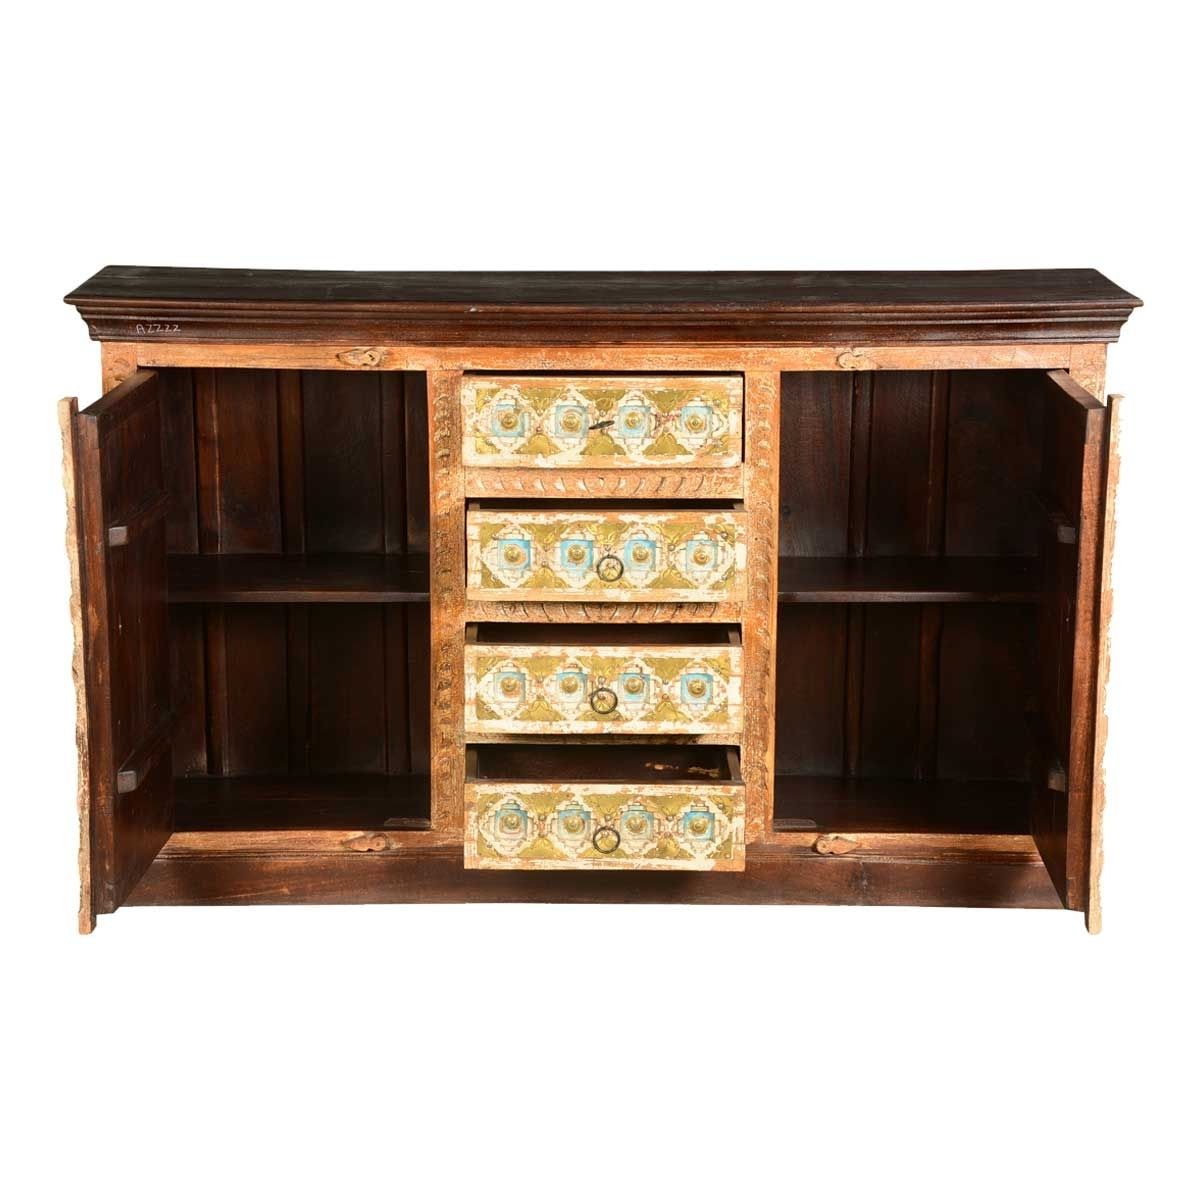 Turkish Handcrafted Brass Inlay Mango Wood 4 Drawer Sideboard Cabinet With Recent Open Shelf Brass 4 Drawer Sideboards (Photo 1 of 20)